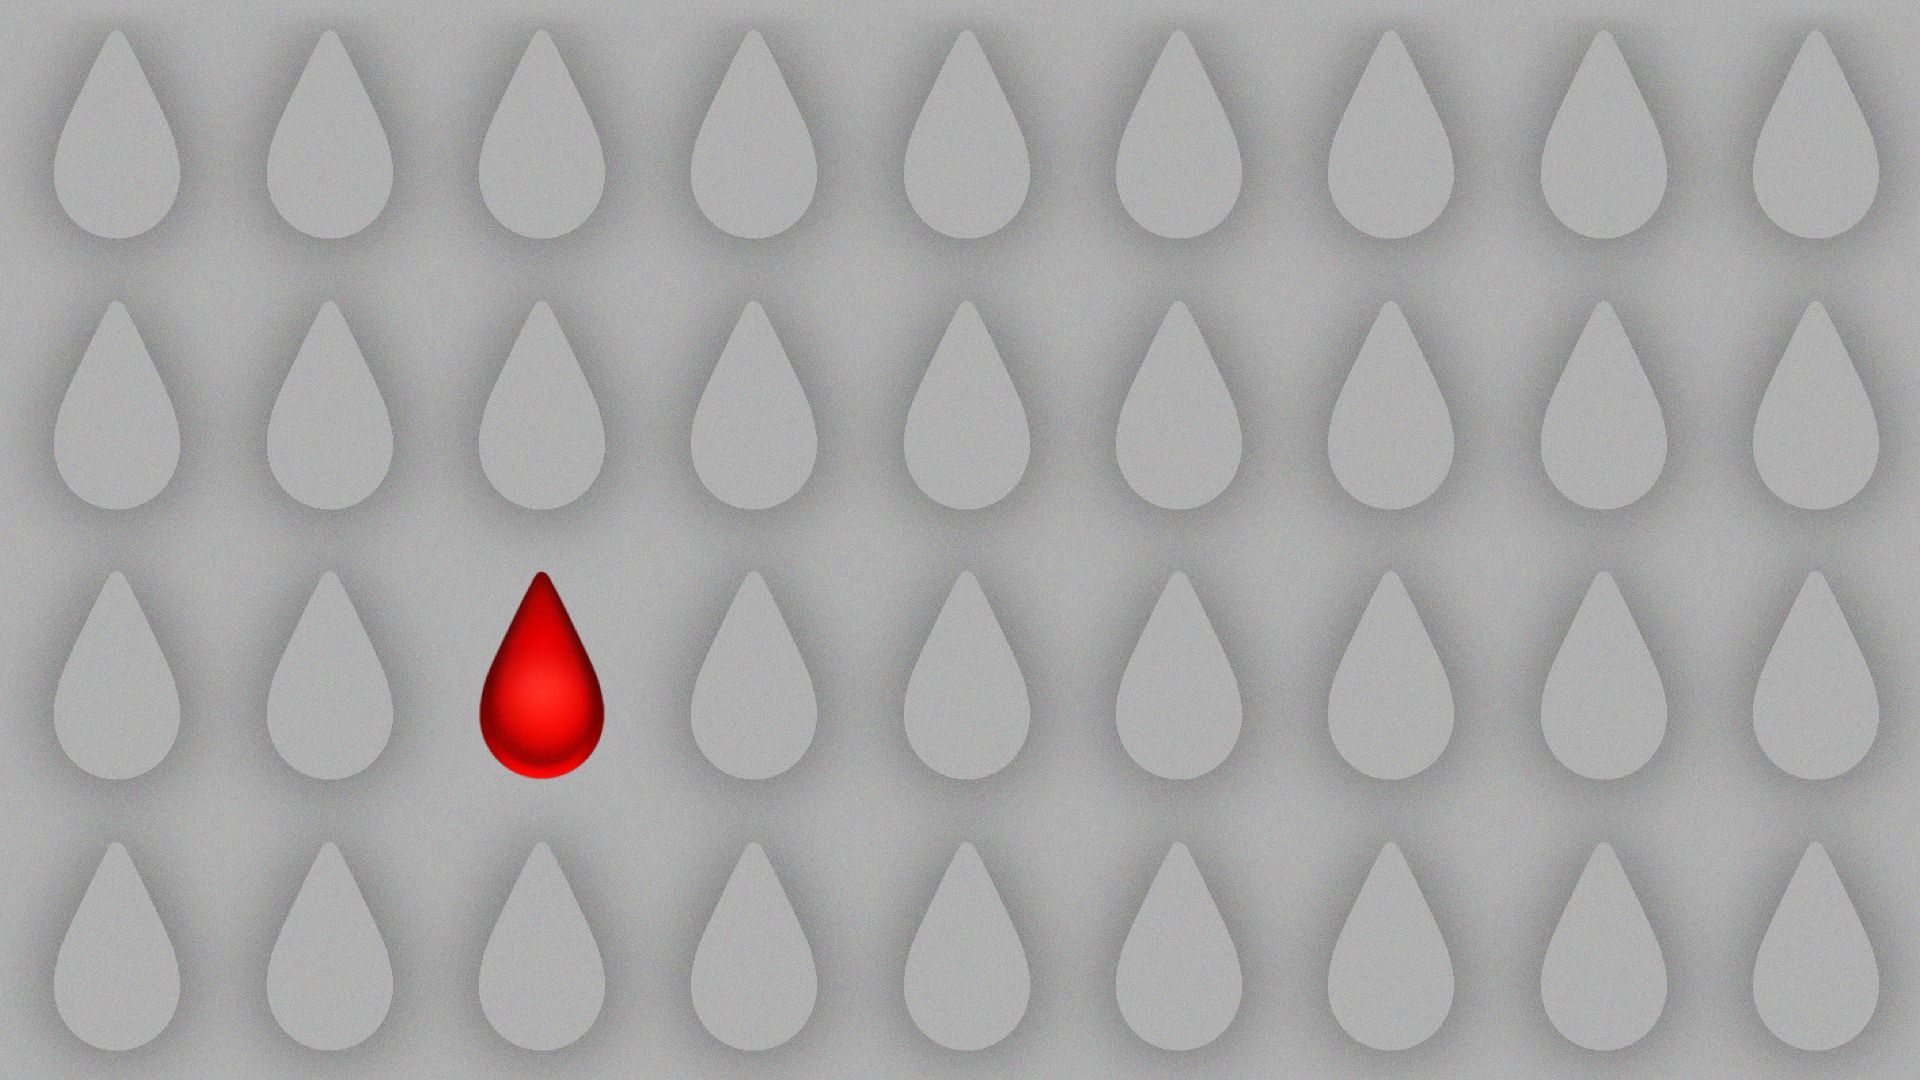 Illustration of a pattern of repeating blood droplets, but all are only outlined except for one.